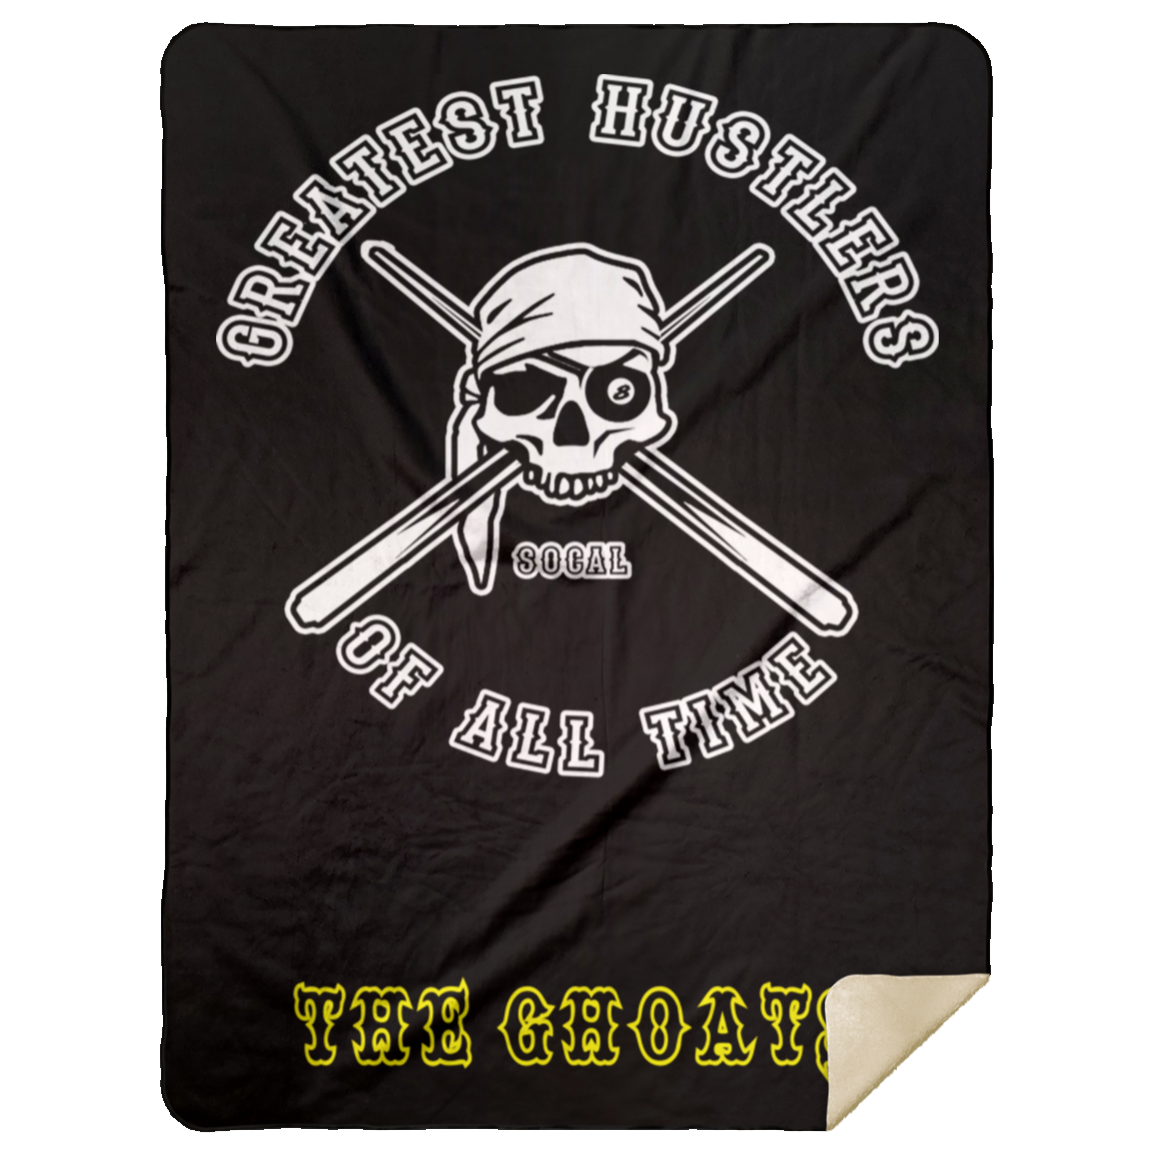 The GHOATS Custom Design. #4 Motorcycle Club Style. Ver 1/2. Mink Sherpa Blanket 60x80